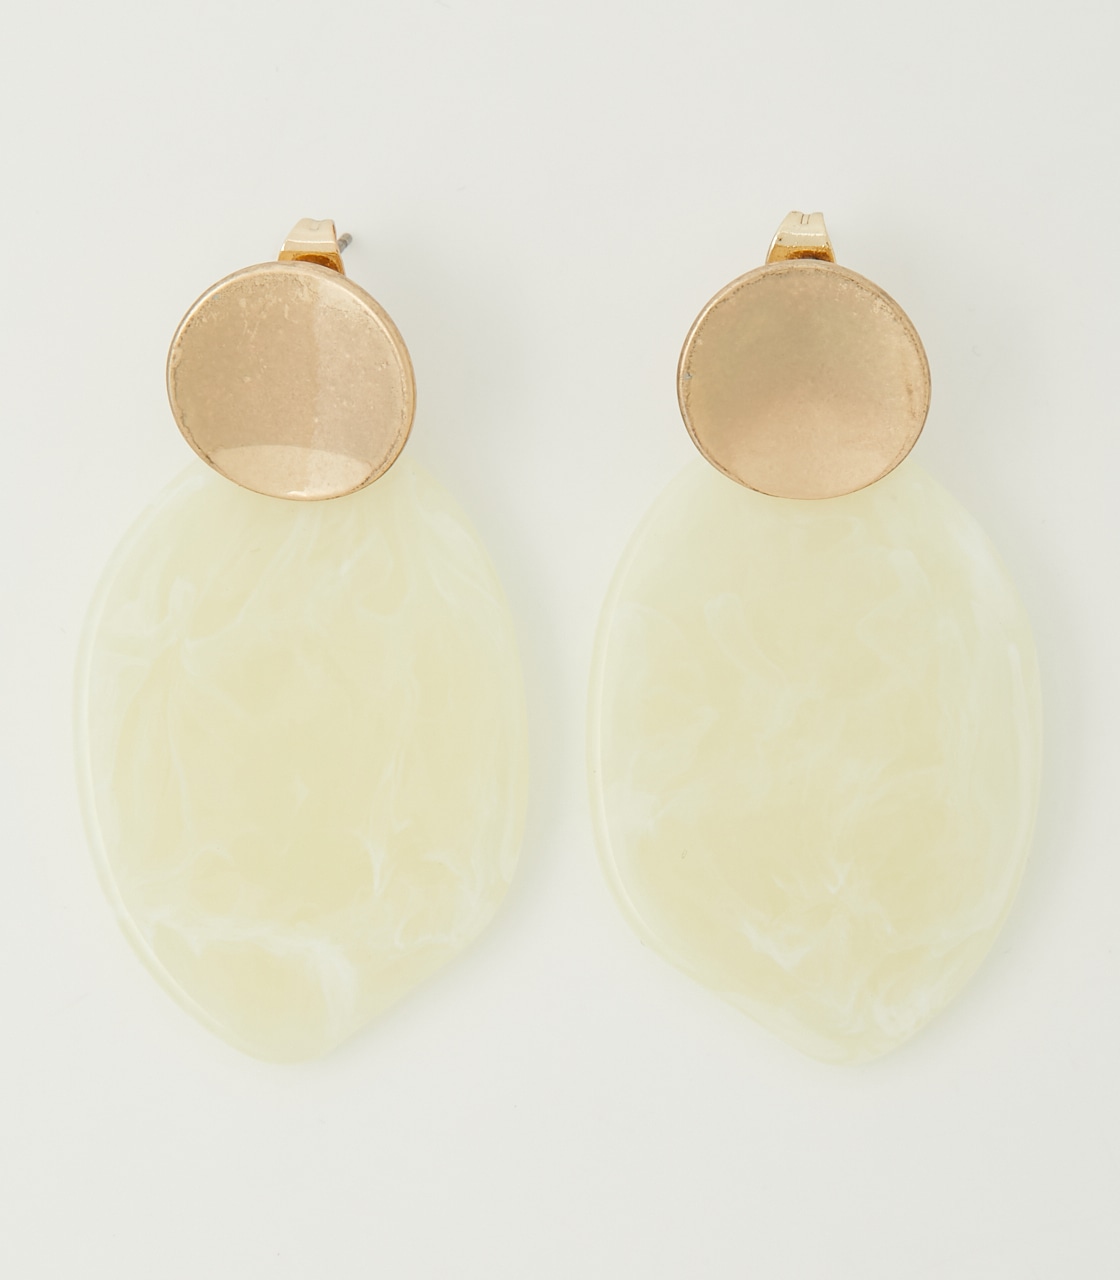 CIRCLE MARBLE PLATE EARRINGS/サークルマーブルプレートピアス 詳細画像 IVOY 1